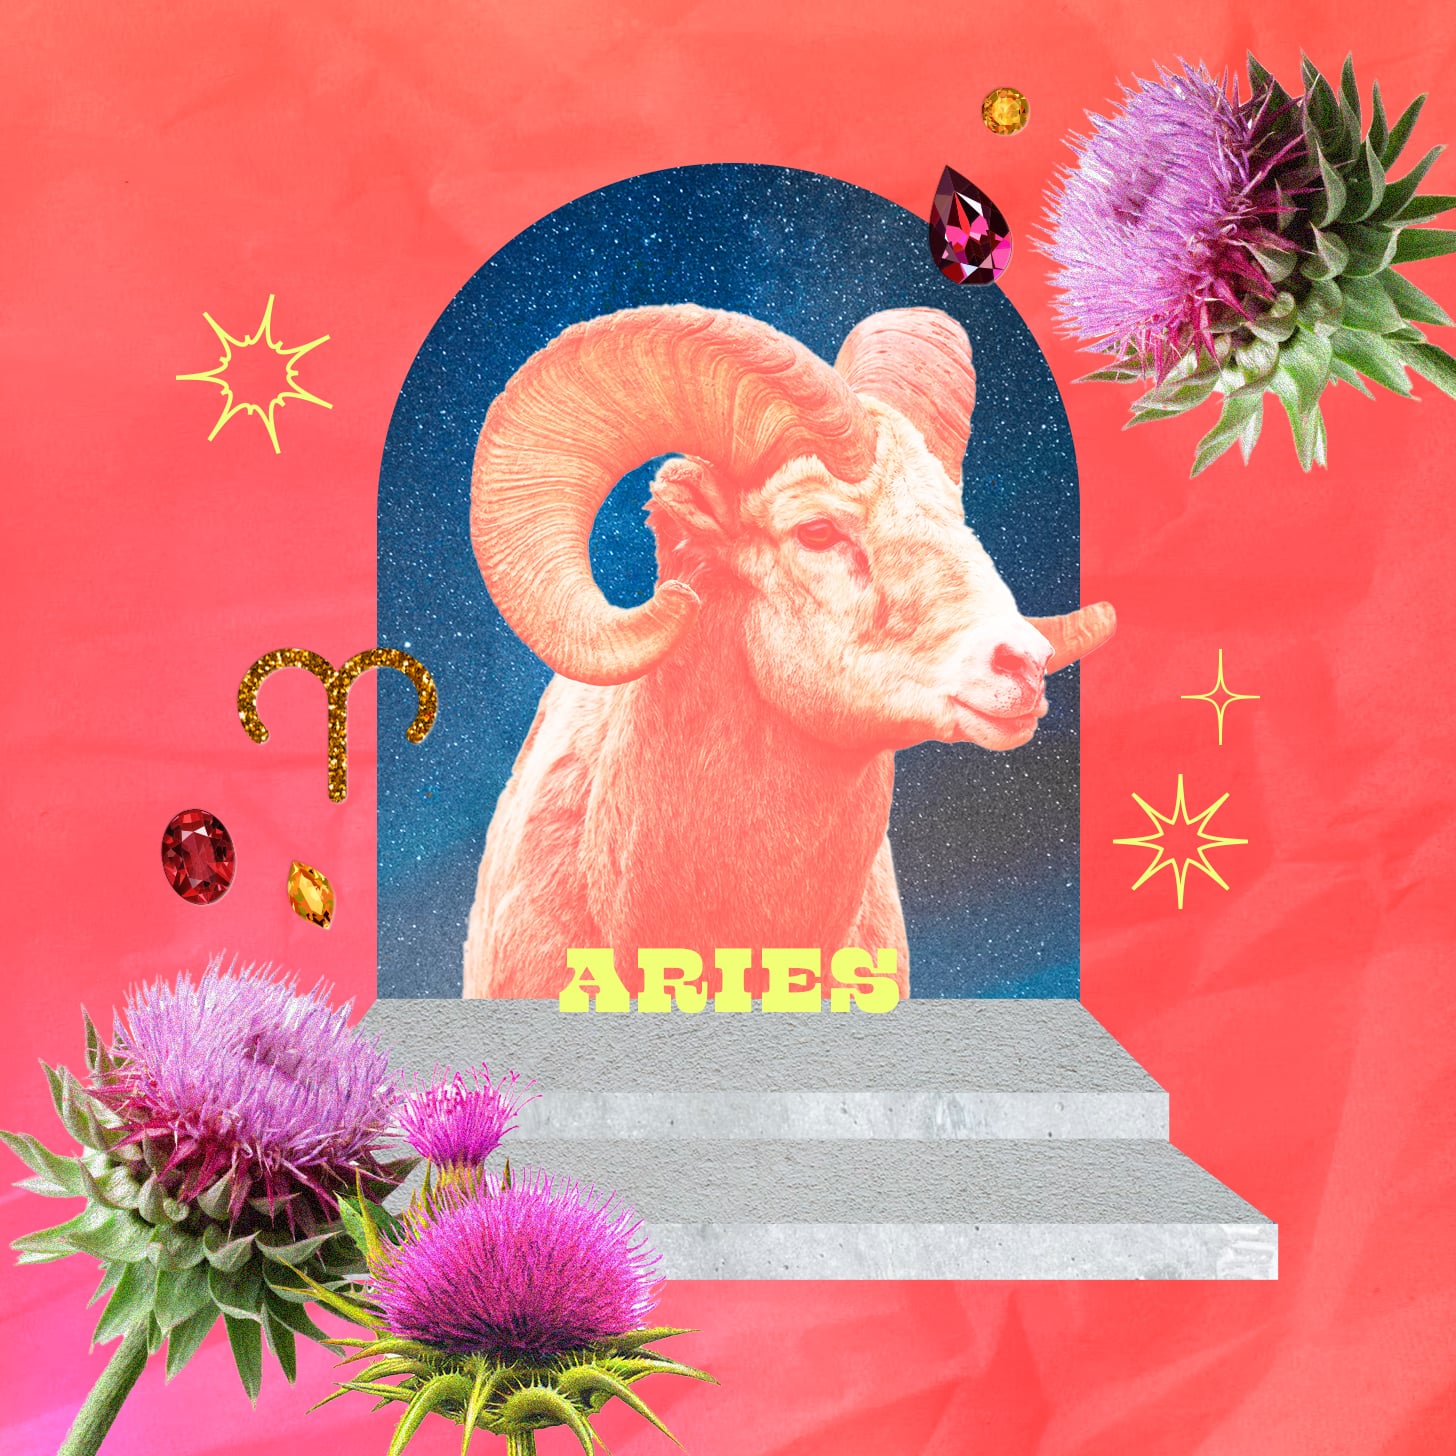 Aries weekly horoscope for june 12, 2022